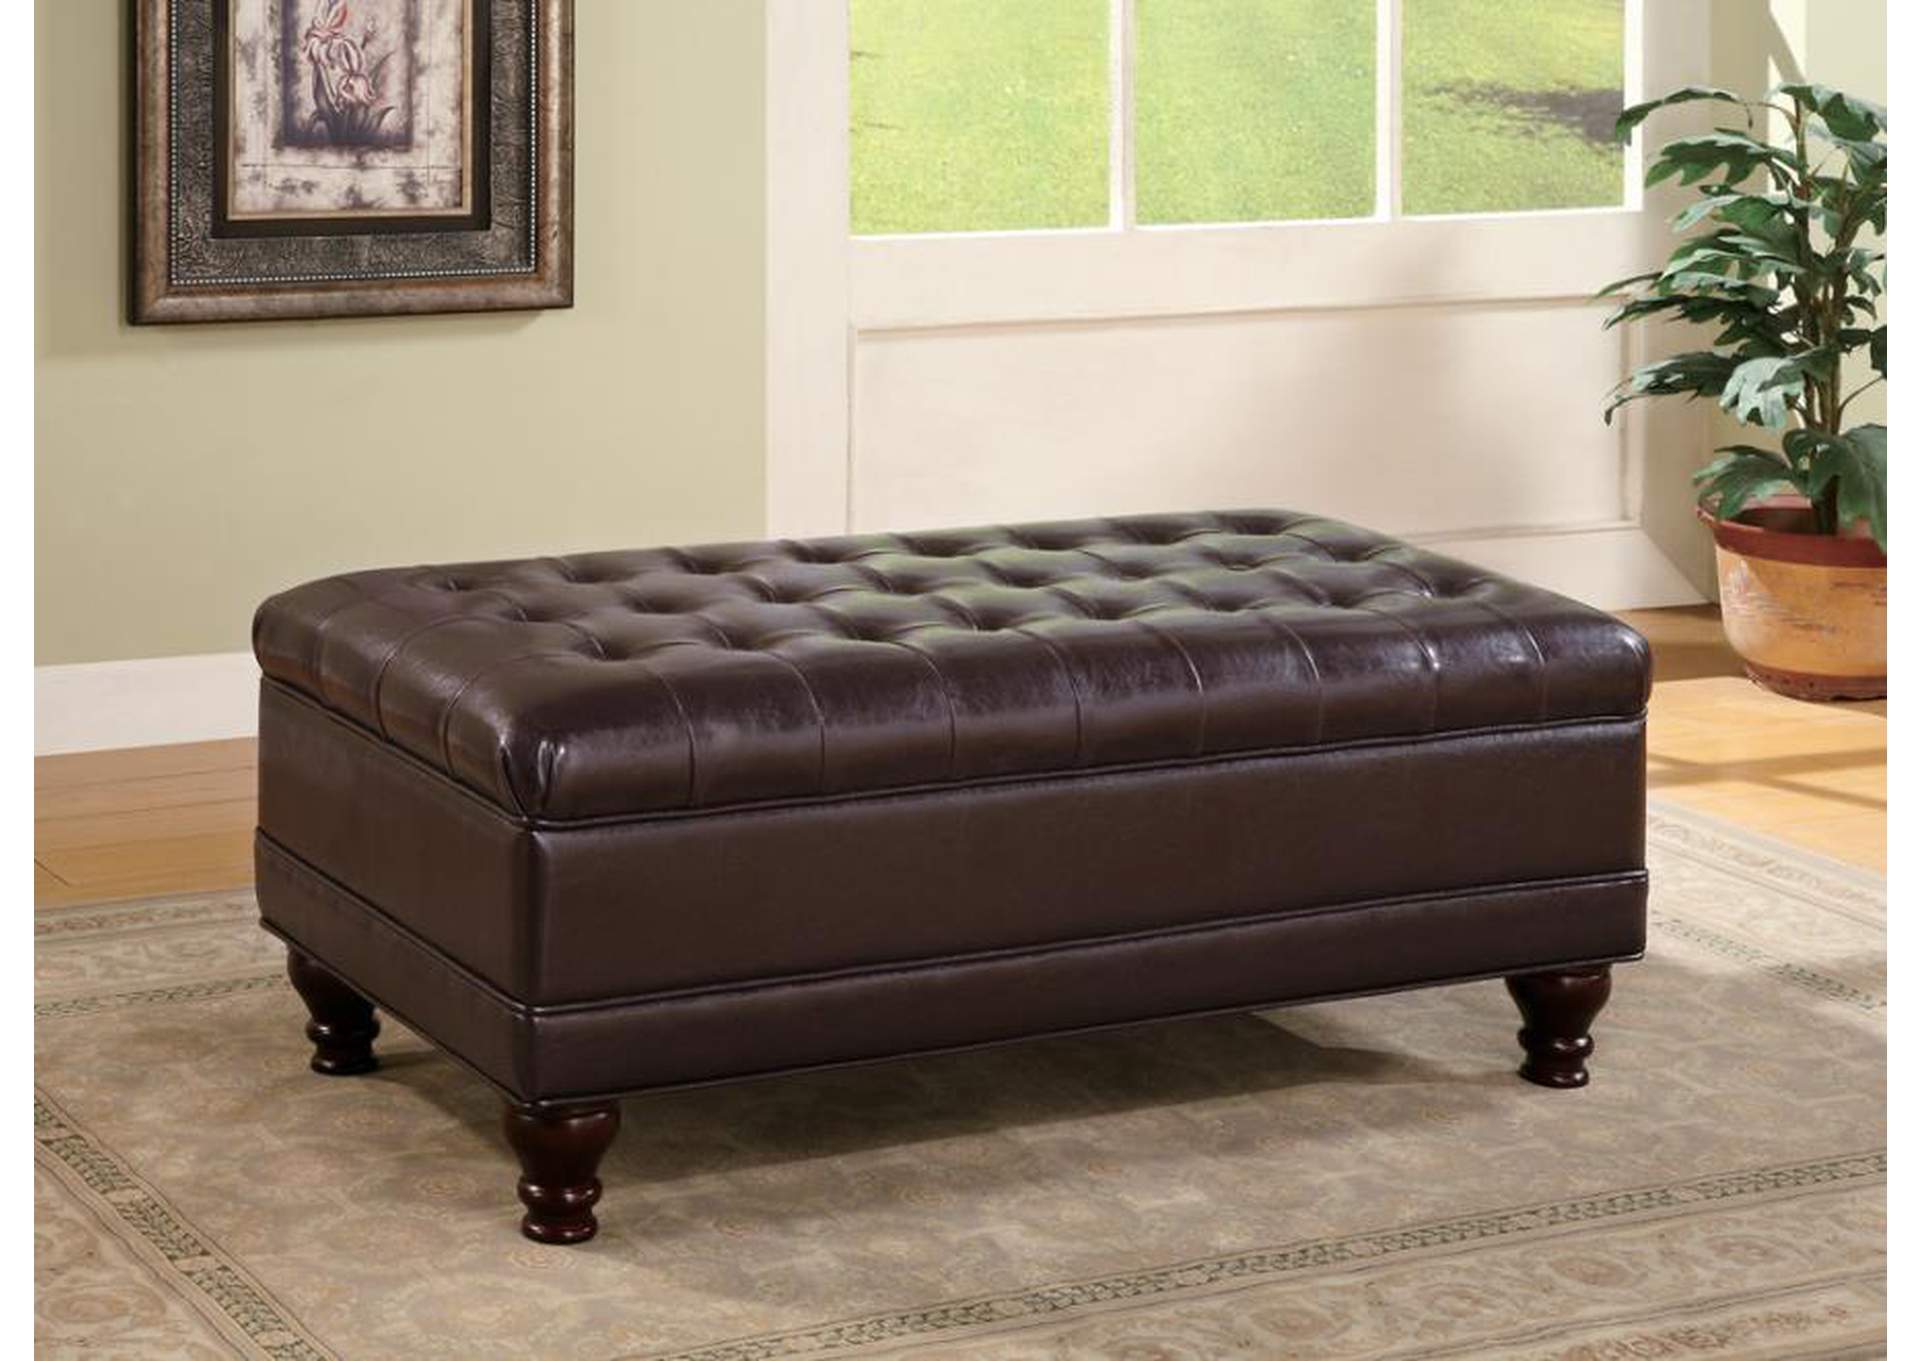 Tufted Storage Ottoman with Turned Legs Brown,Coaster Furniture